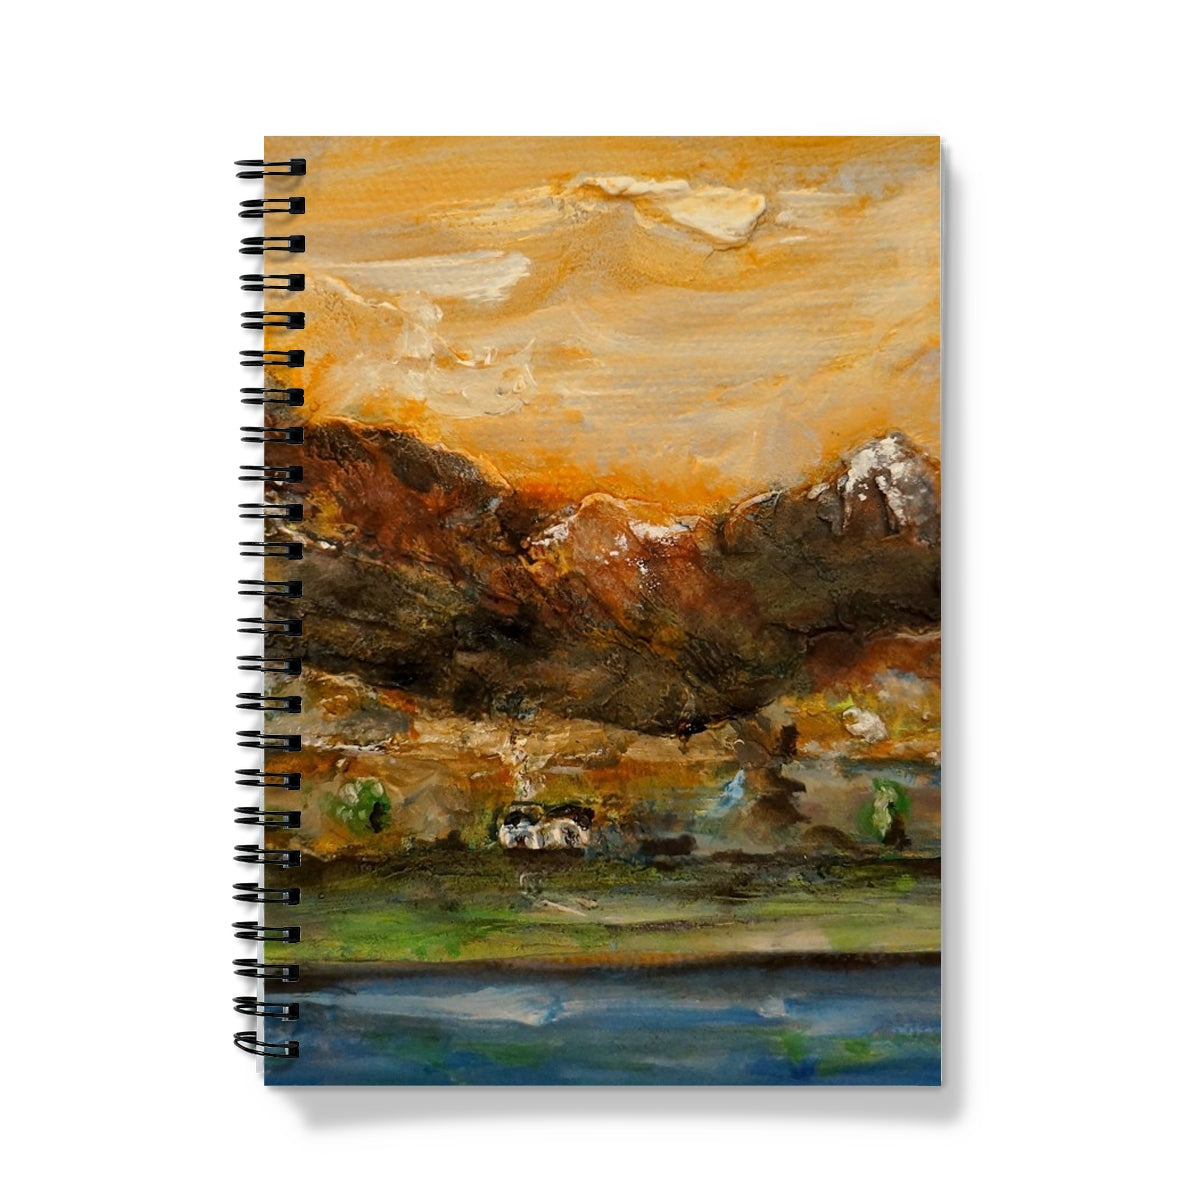 A Glencoe Cottage Art Gifts Notebook-Journals & Notebooks-Glencoe Art Gallery-A5-Lined-Paintings, Prints, Homeware, Art Gifts From Scotland By Scottish Artist Kevin Hunter